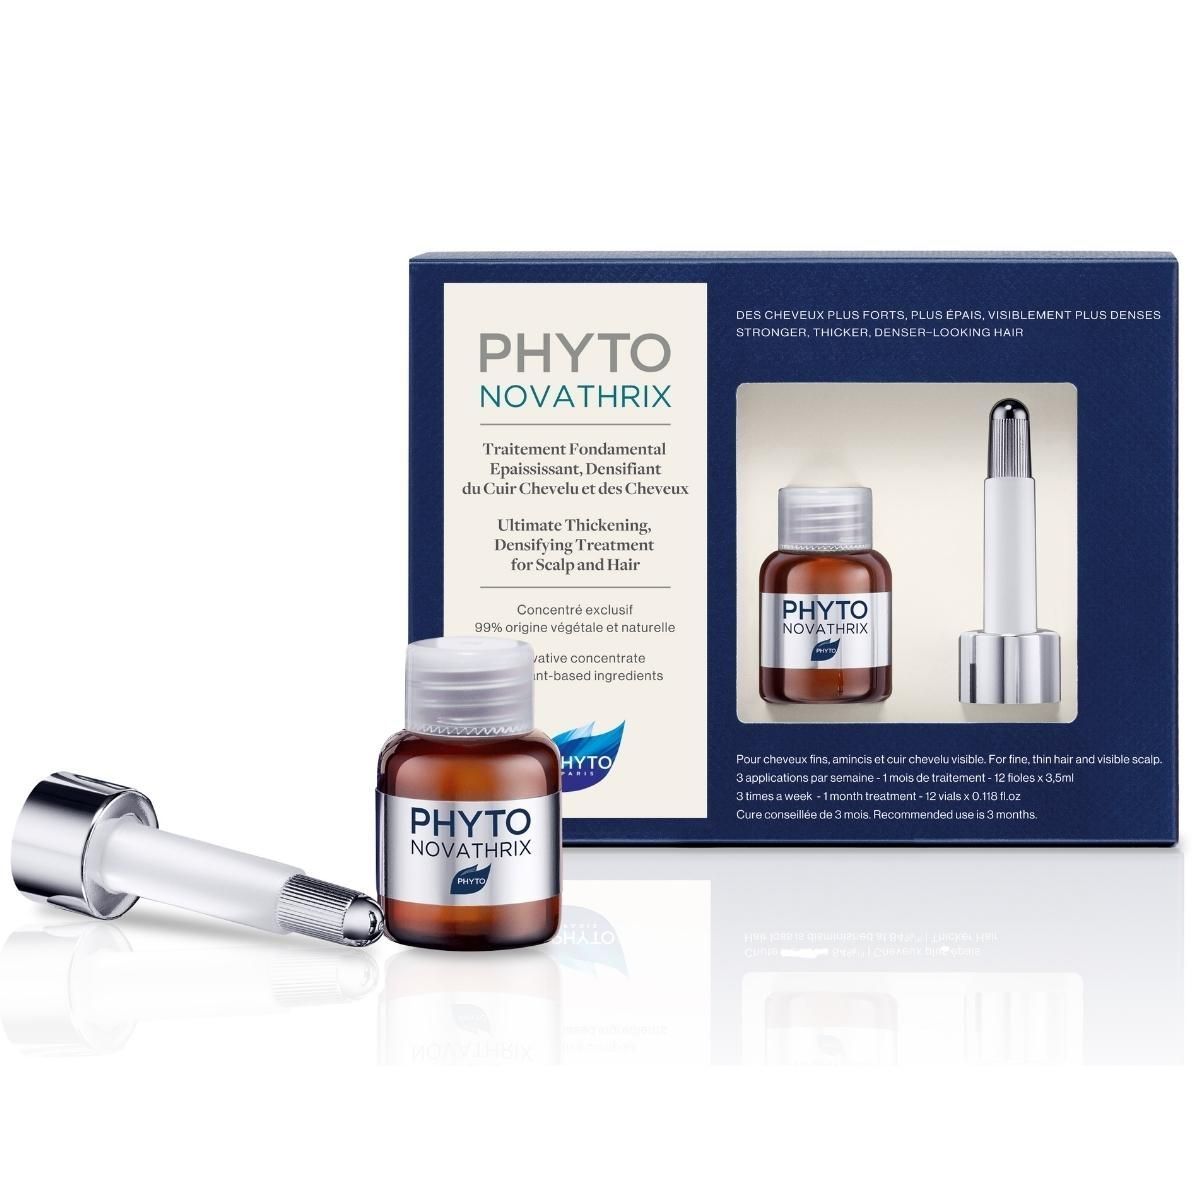 PHYTONOVATHRIX Thickening, Densifying Treatment for Scalp and Hair